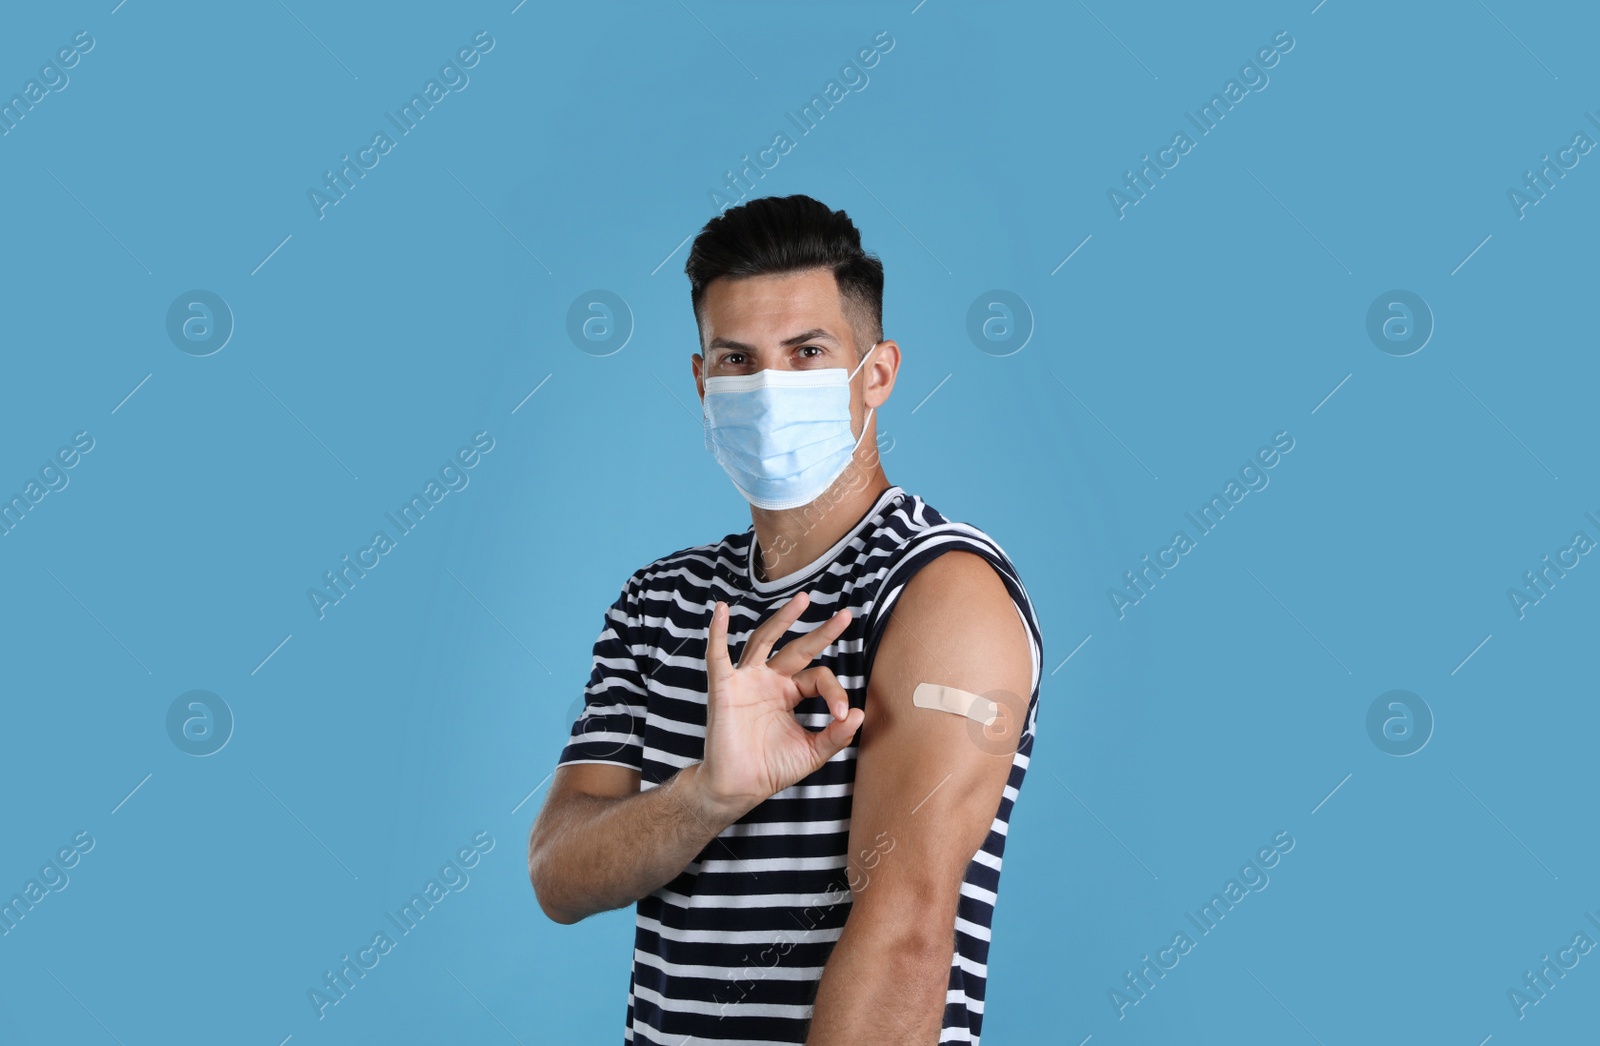 Photo of Vaccinated man with protective mask and medical plaster on his arm showing okay gesture against light blue background